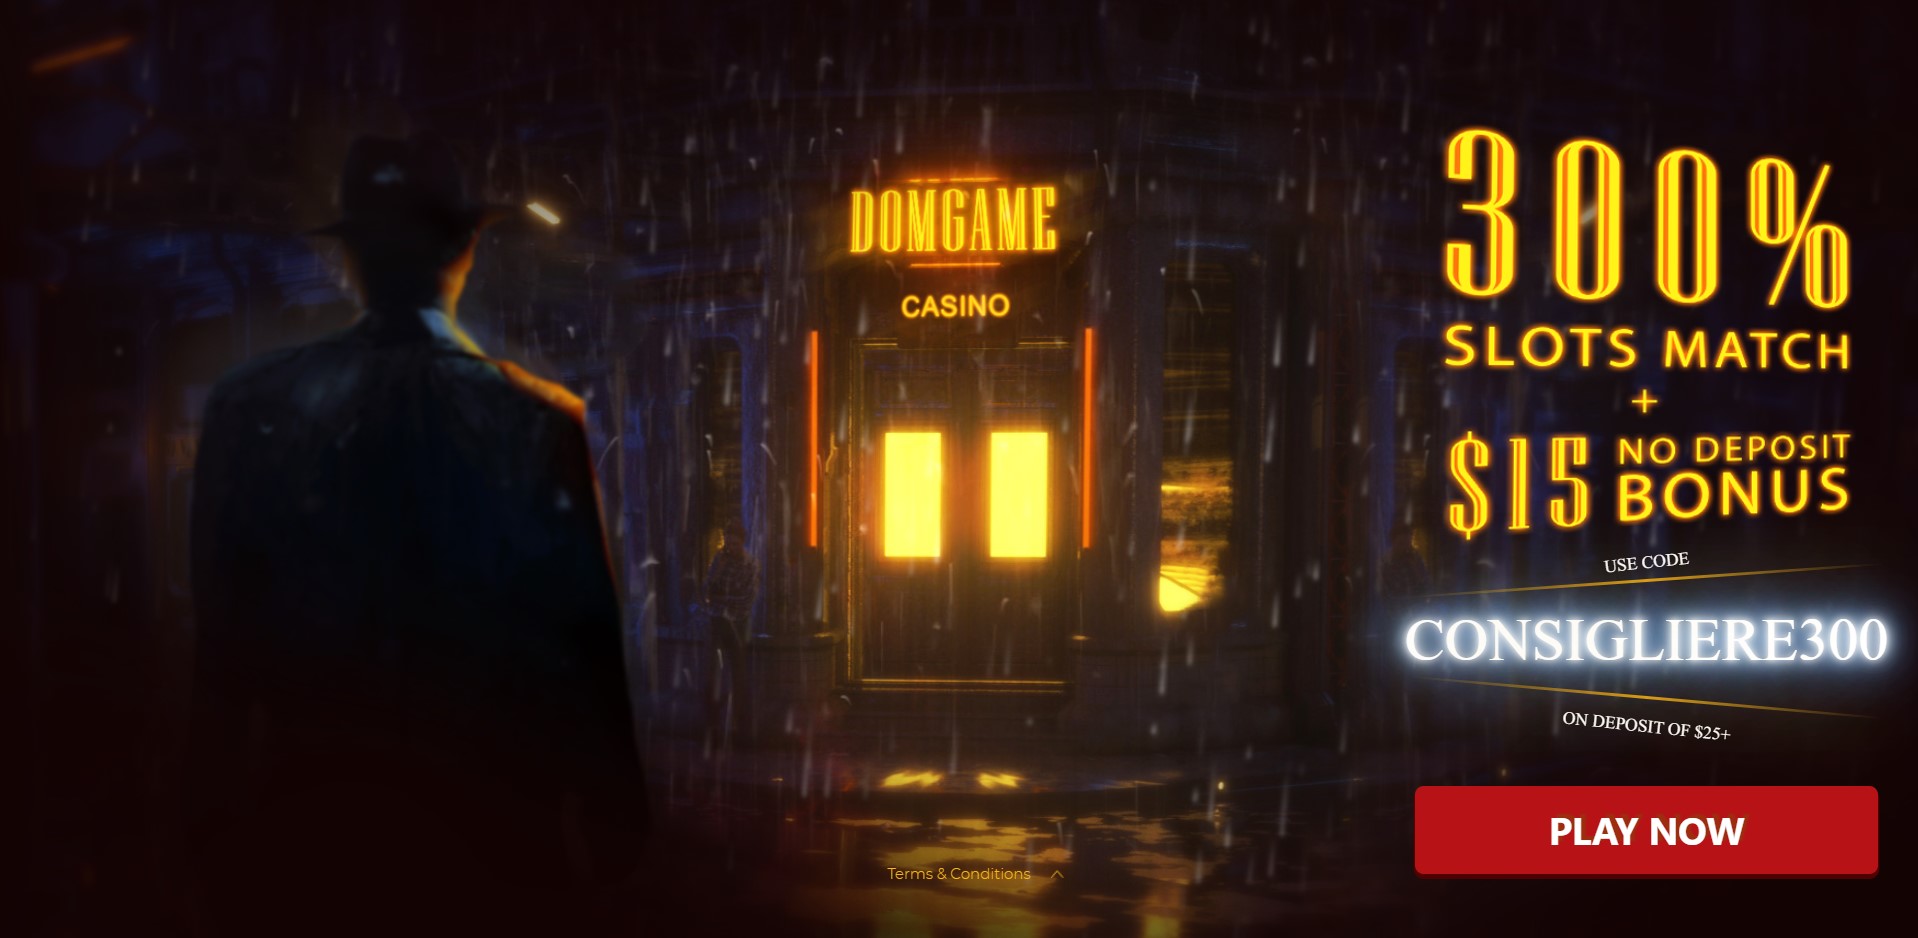 Domgame casino Welcome Offer